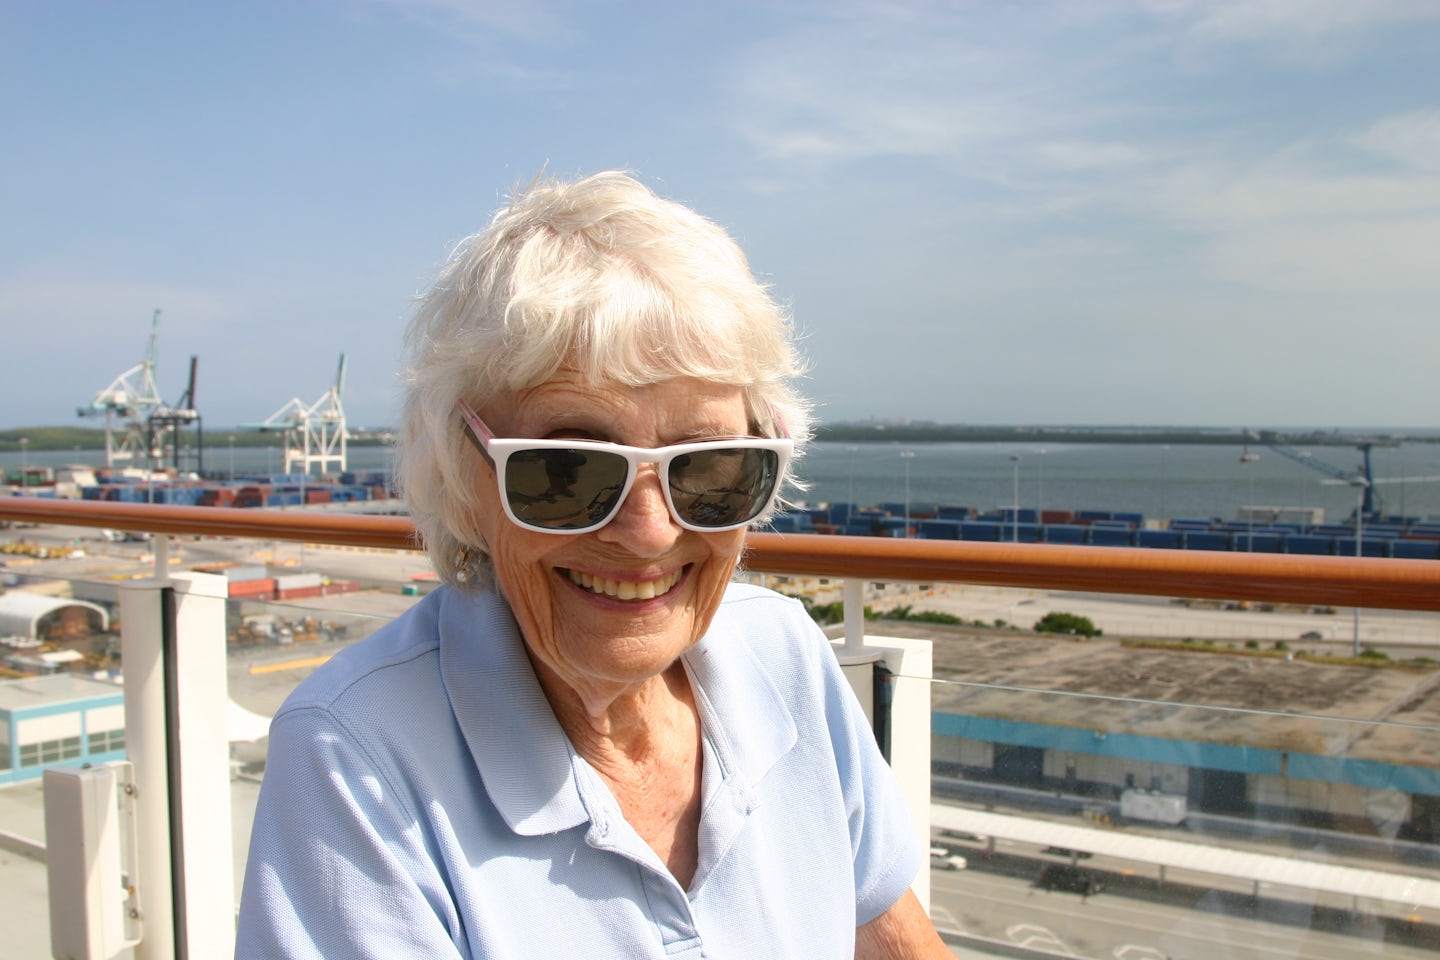 My mother relaxing on Spice H2O during departure from Miami